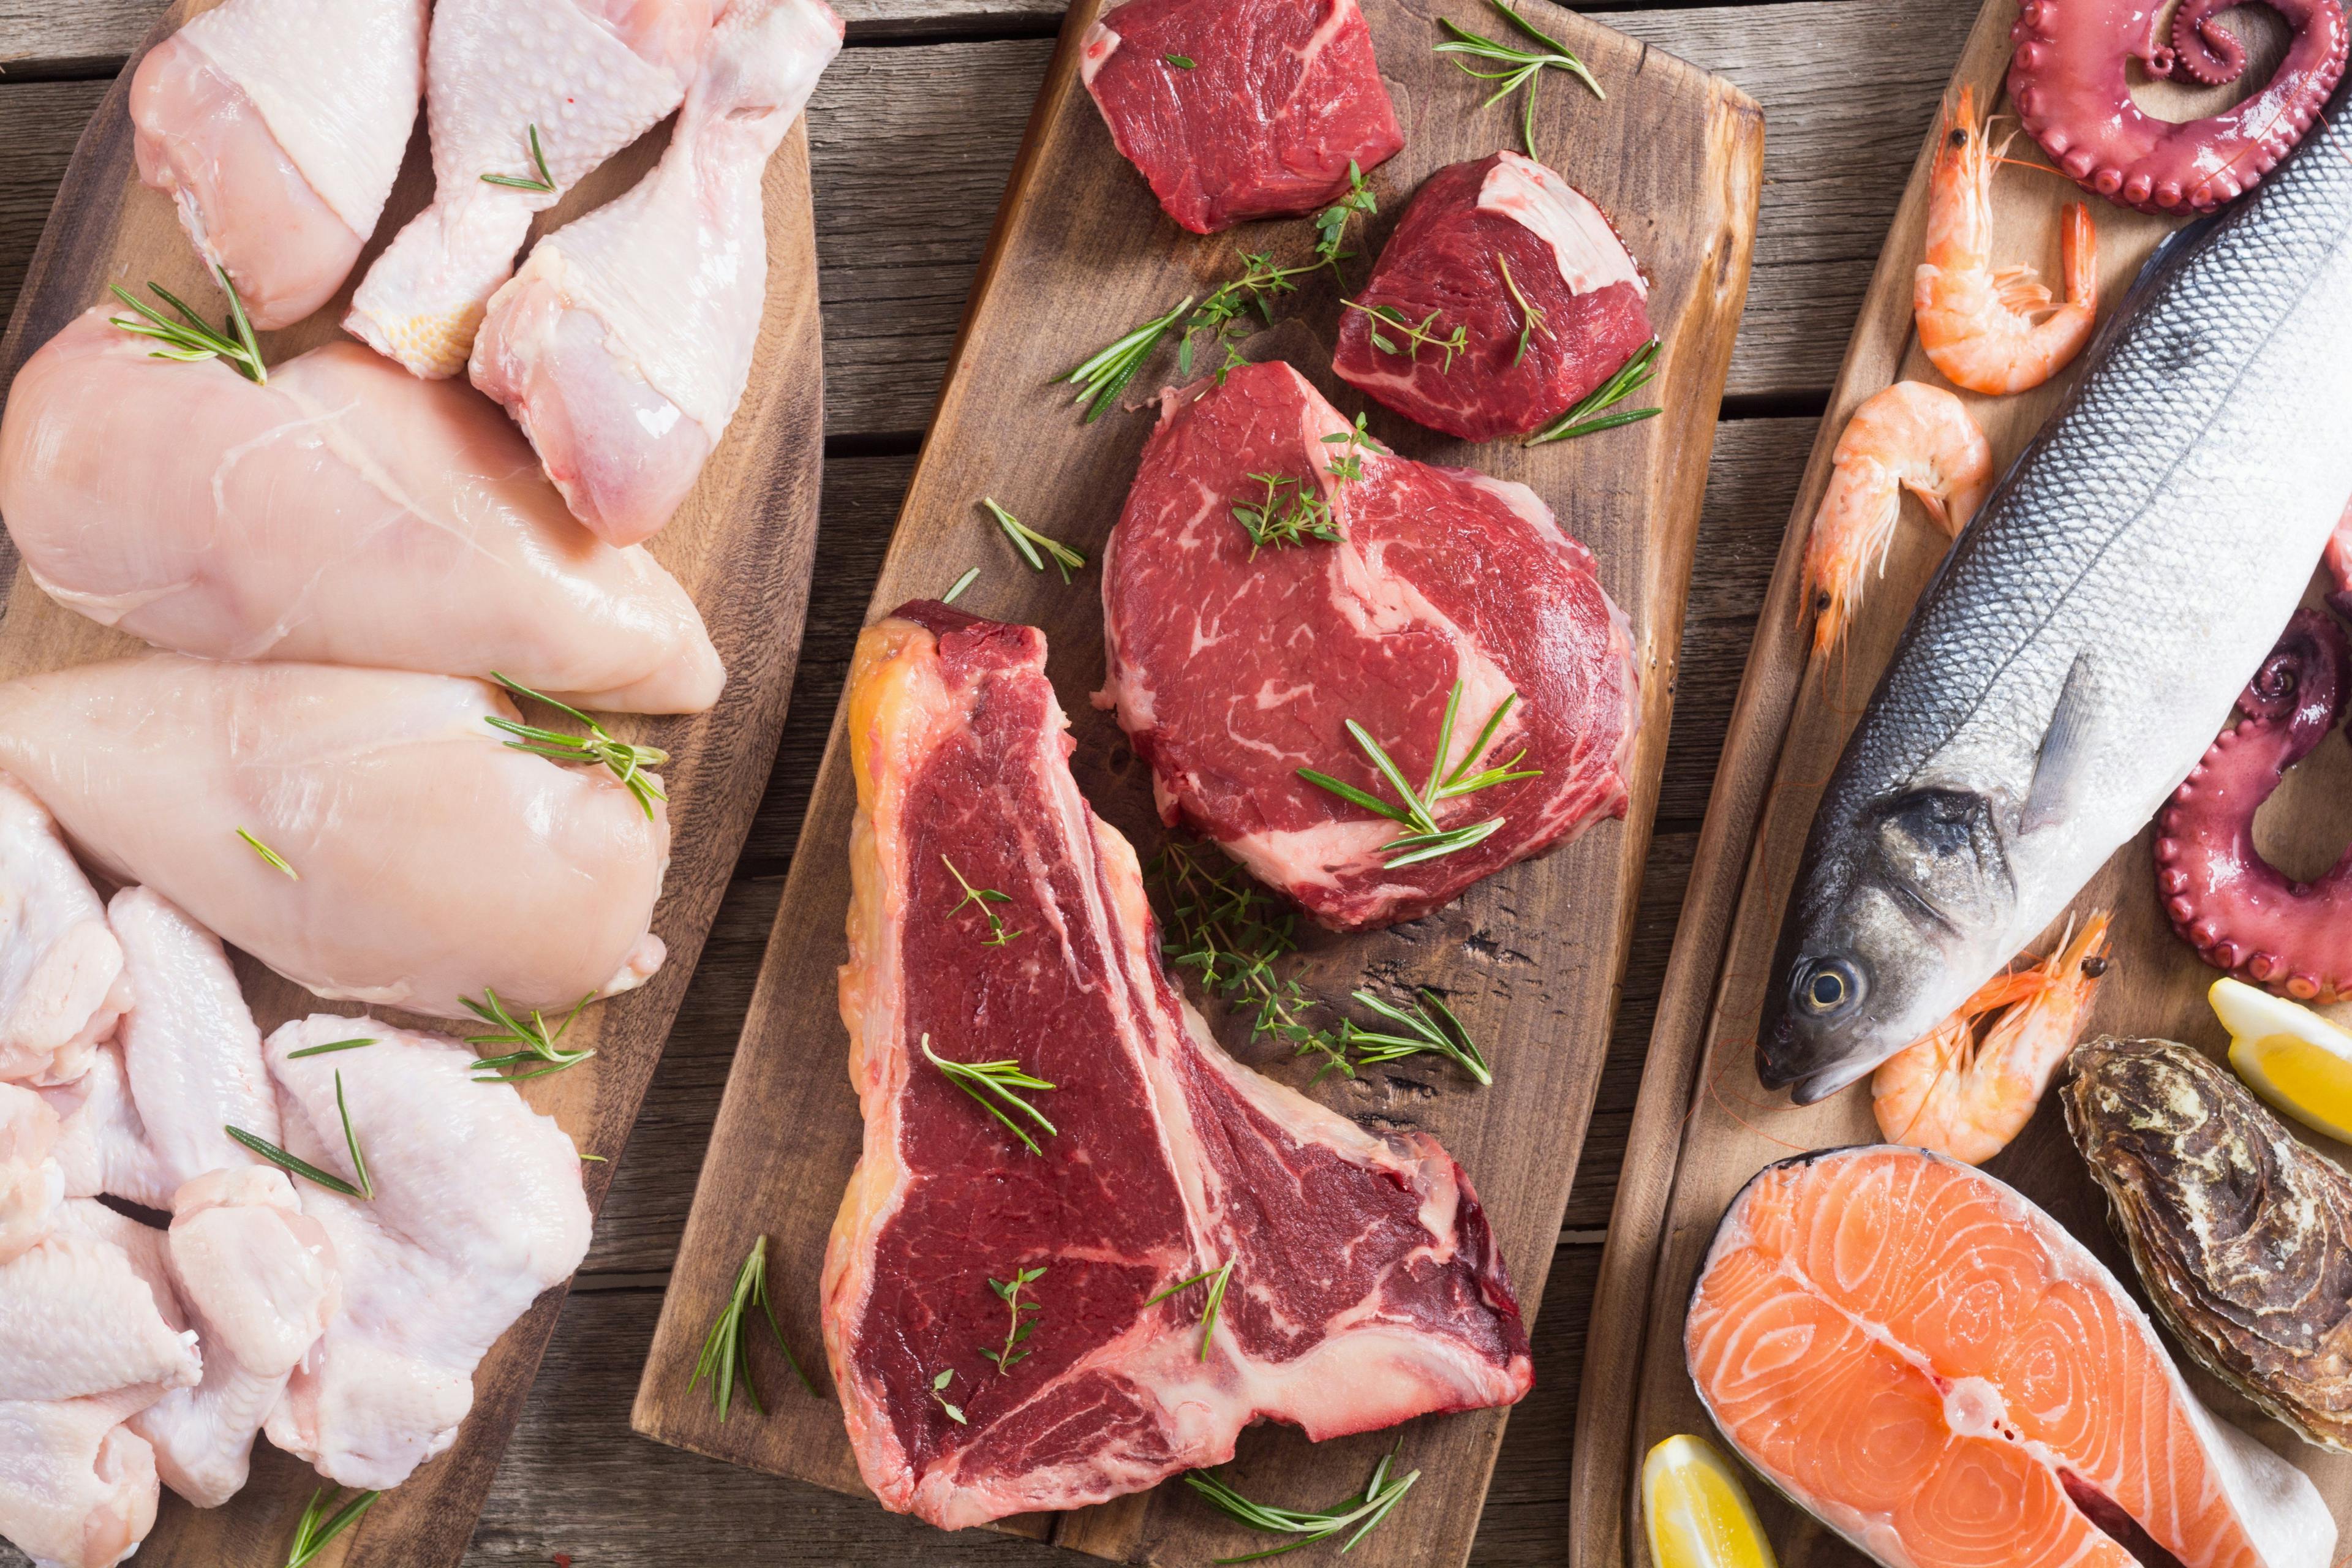 To Reduce Risk of Heart Arrhythmias, Eat More Meat